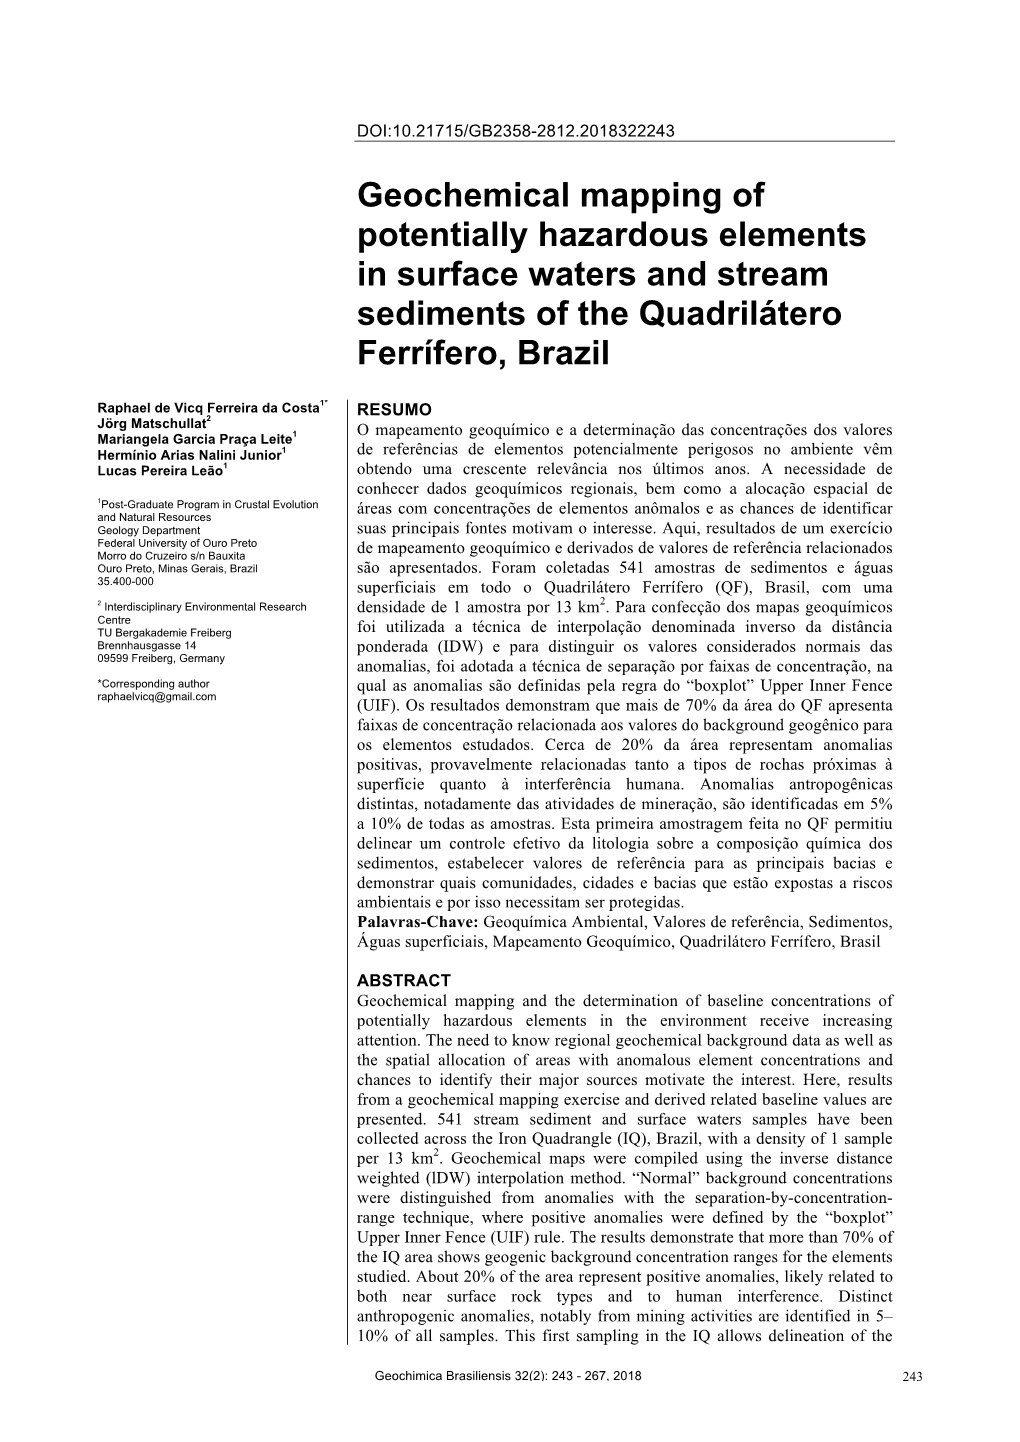 Geochemical Mapping of Potentially Hazardous Elements in Surface Waters and Stream Sediments of the Quadrilátero Ferrífero, Brazil